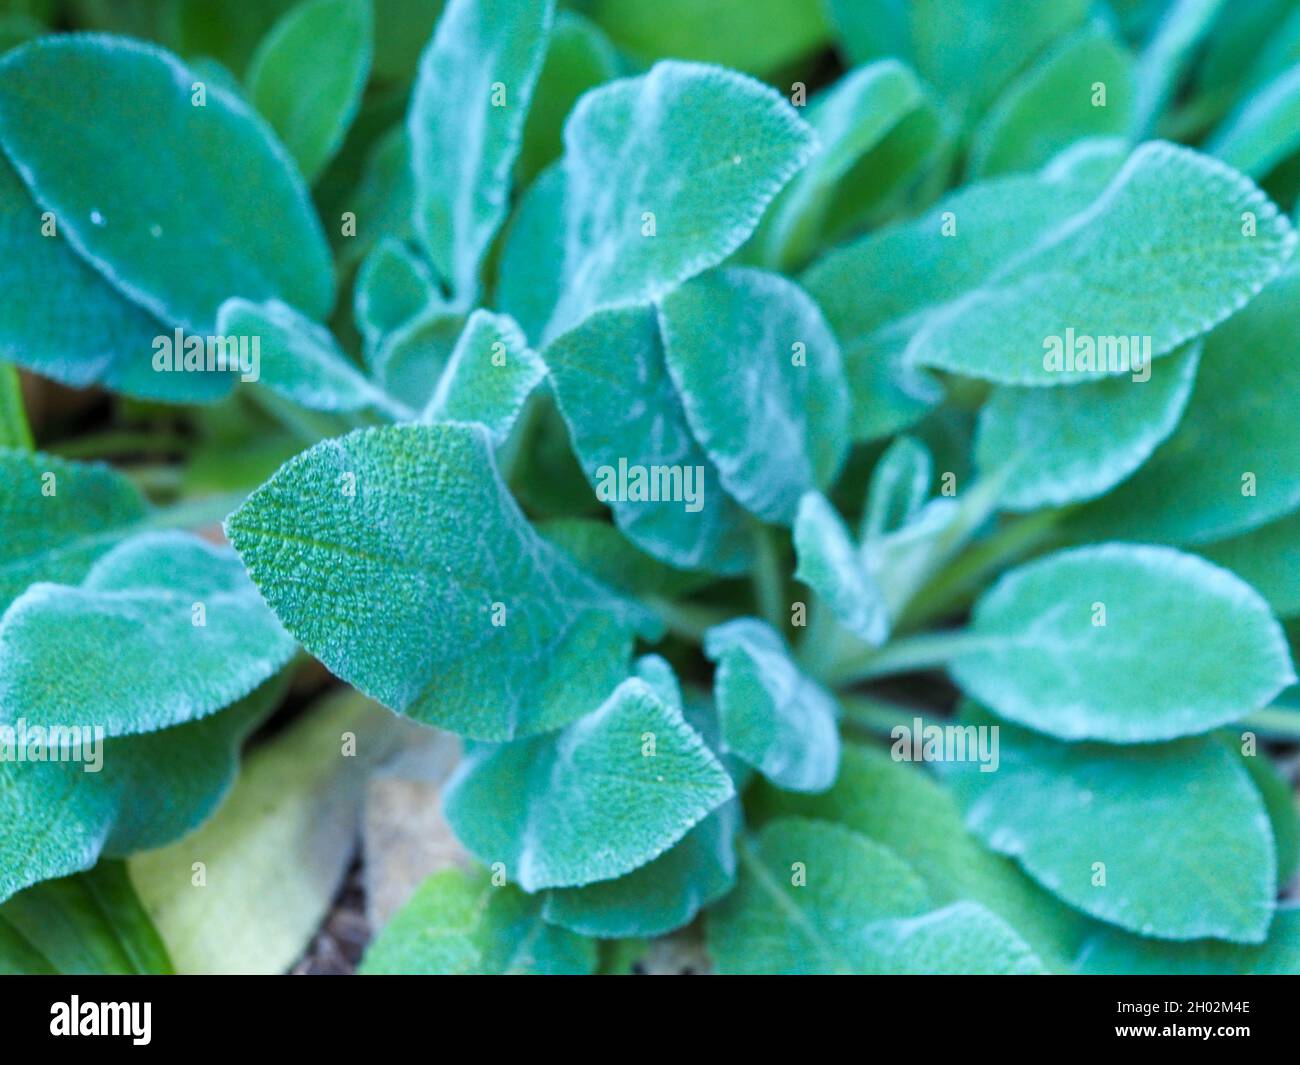 Lamb's Ear plant leaves growing in a shaded spot, Australian sub tropical garden Stock Photo